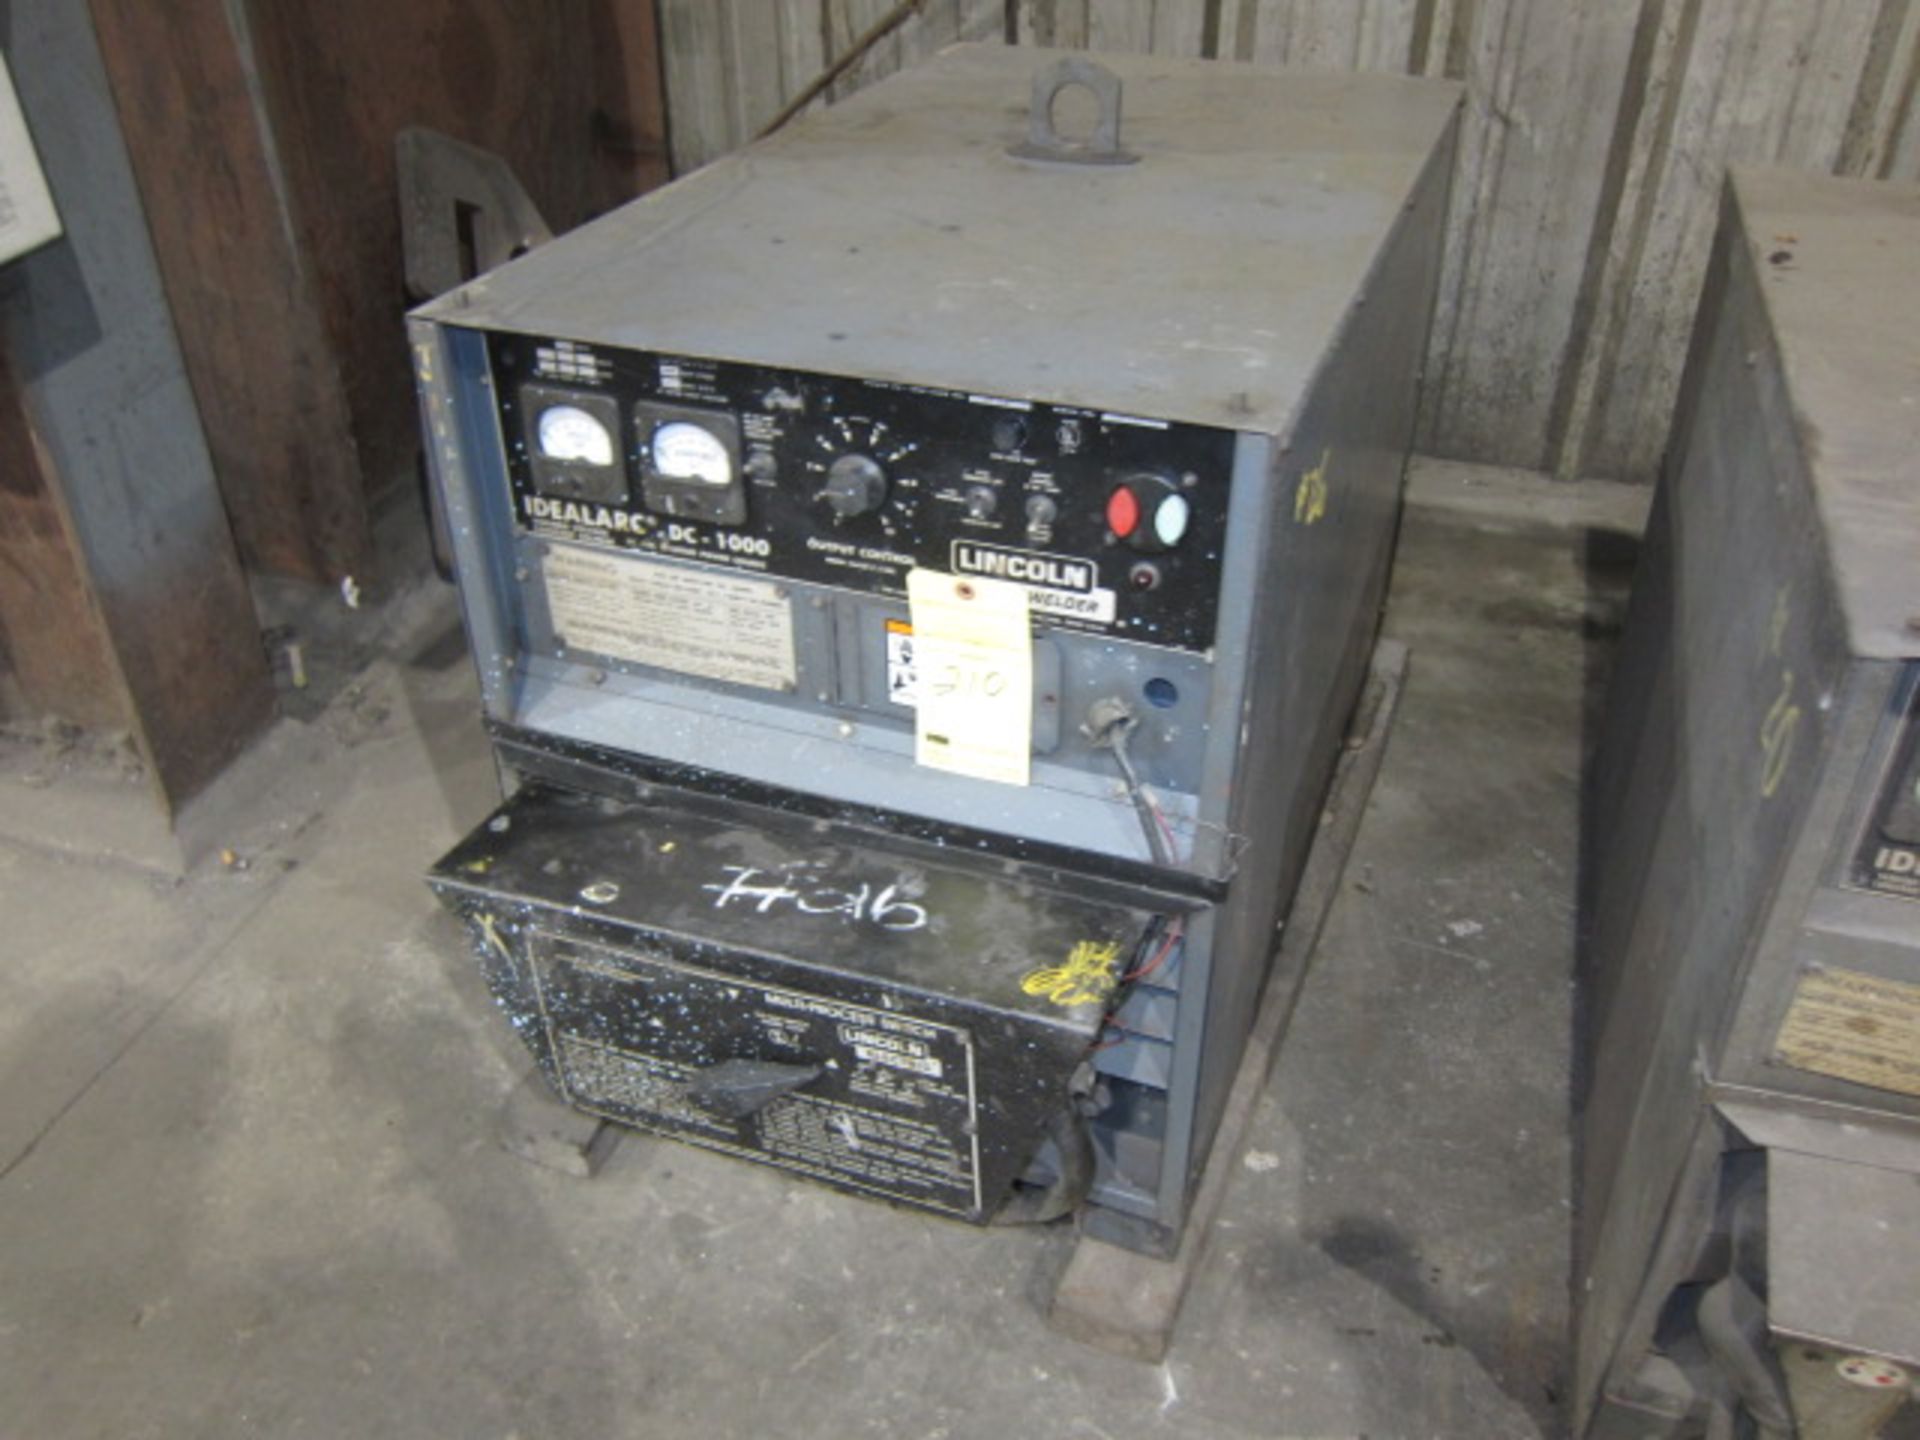 WELDING MACHINE, LINCOLN IDEALARC MDL. DC1000, 1000 amps @ 44 v.,100% duty cycle, S/NAC712508